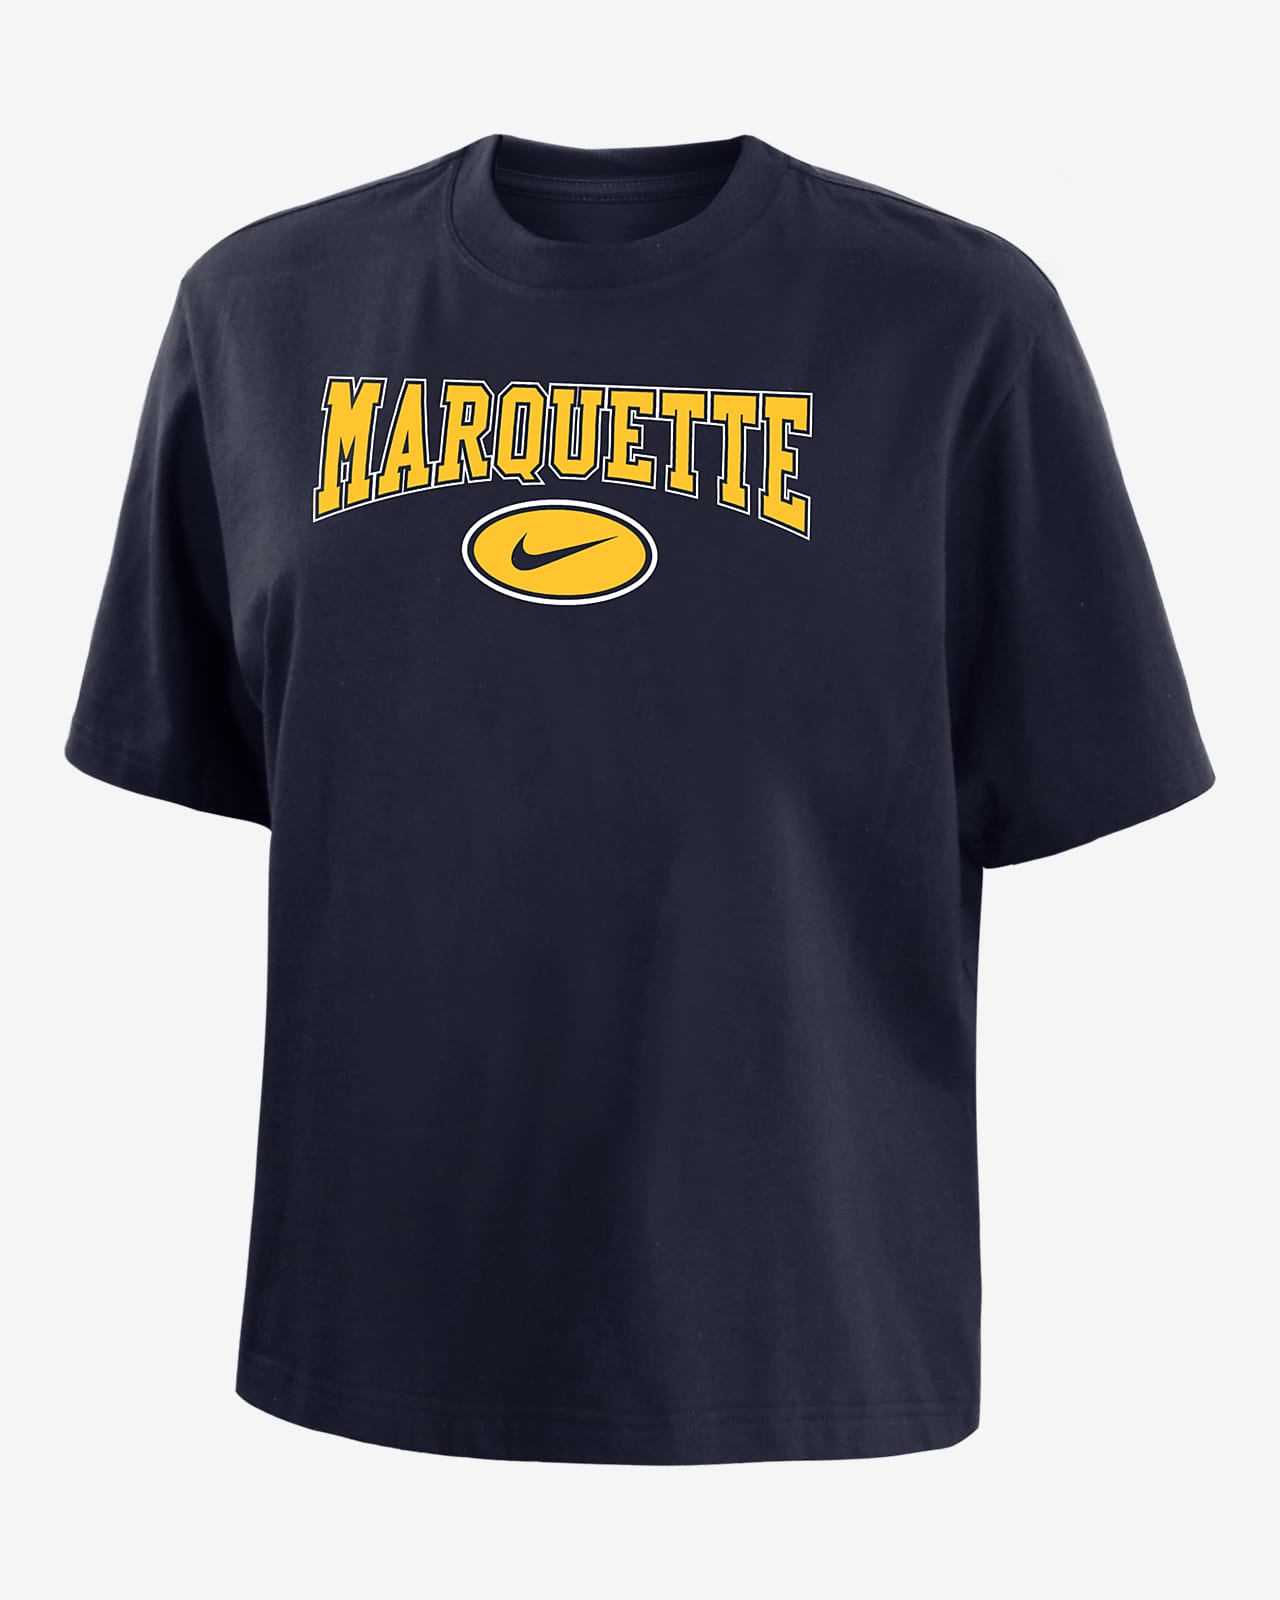 Marquette Women's Nike College Boxy T-Shirt